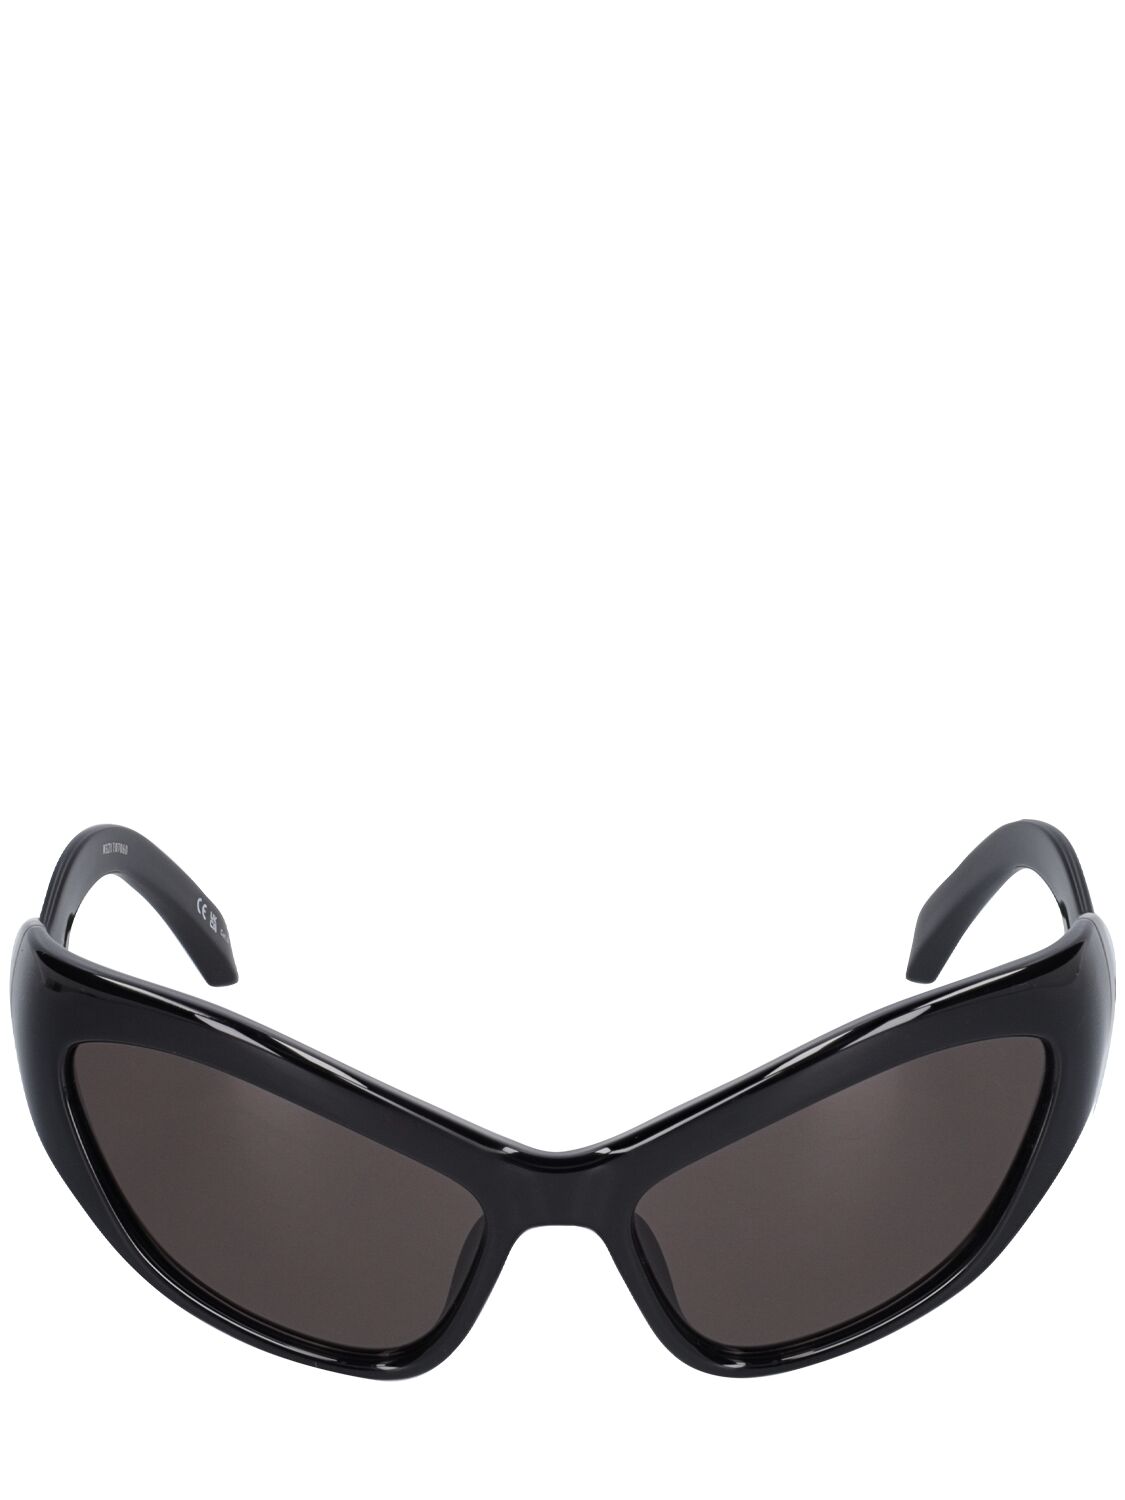 Image of 0319s Hamptons Injected Sunglasses